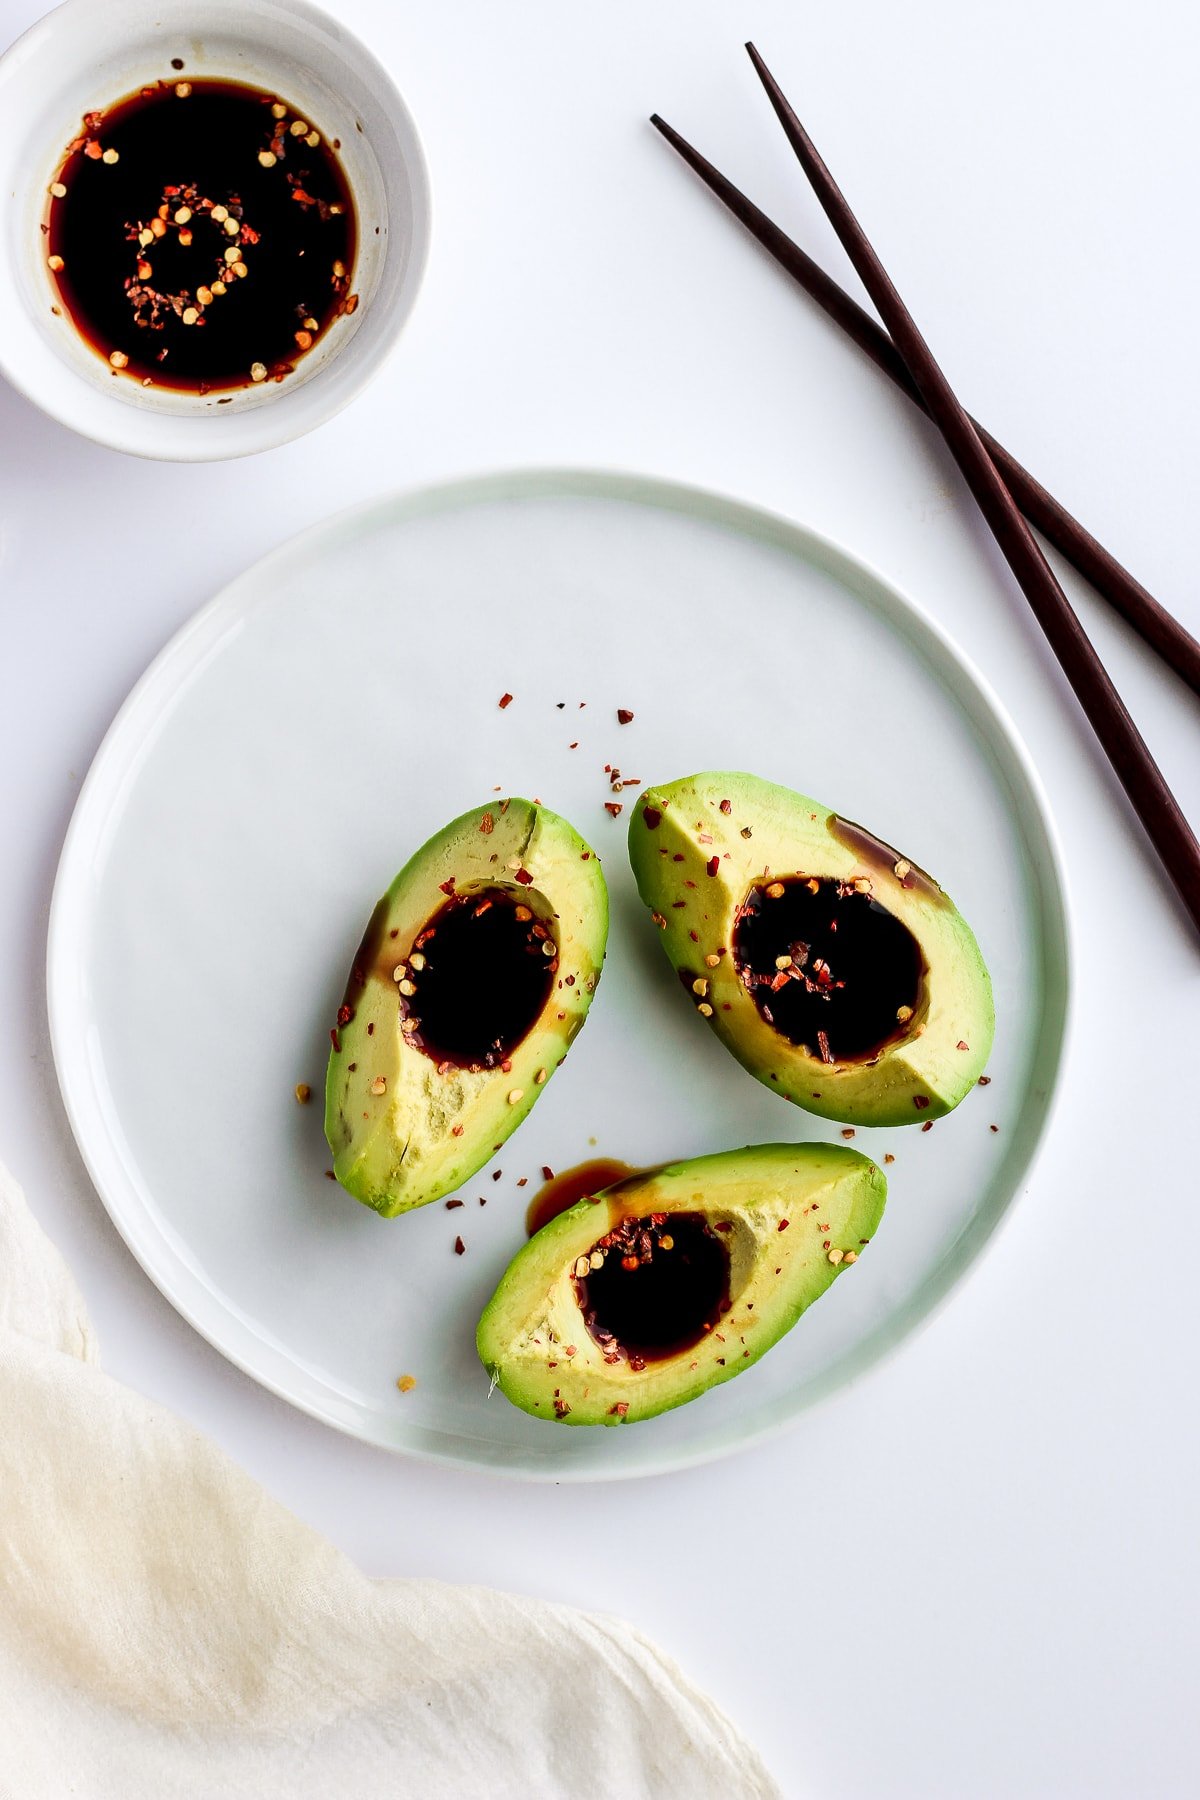 Plate with avocado and coconut aminos. 